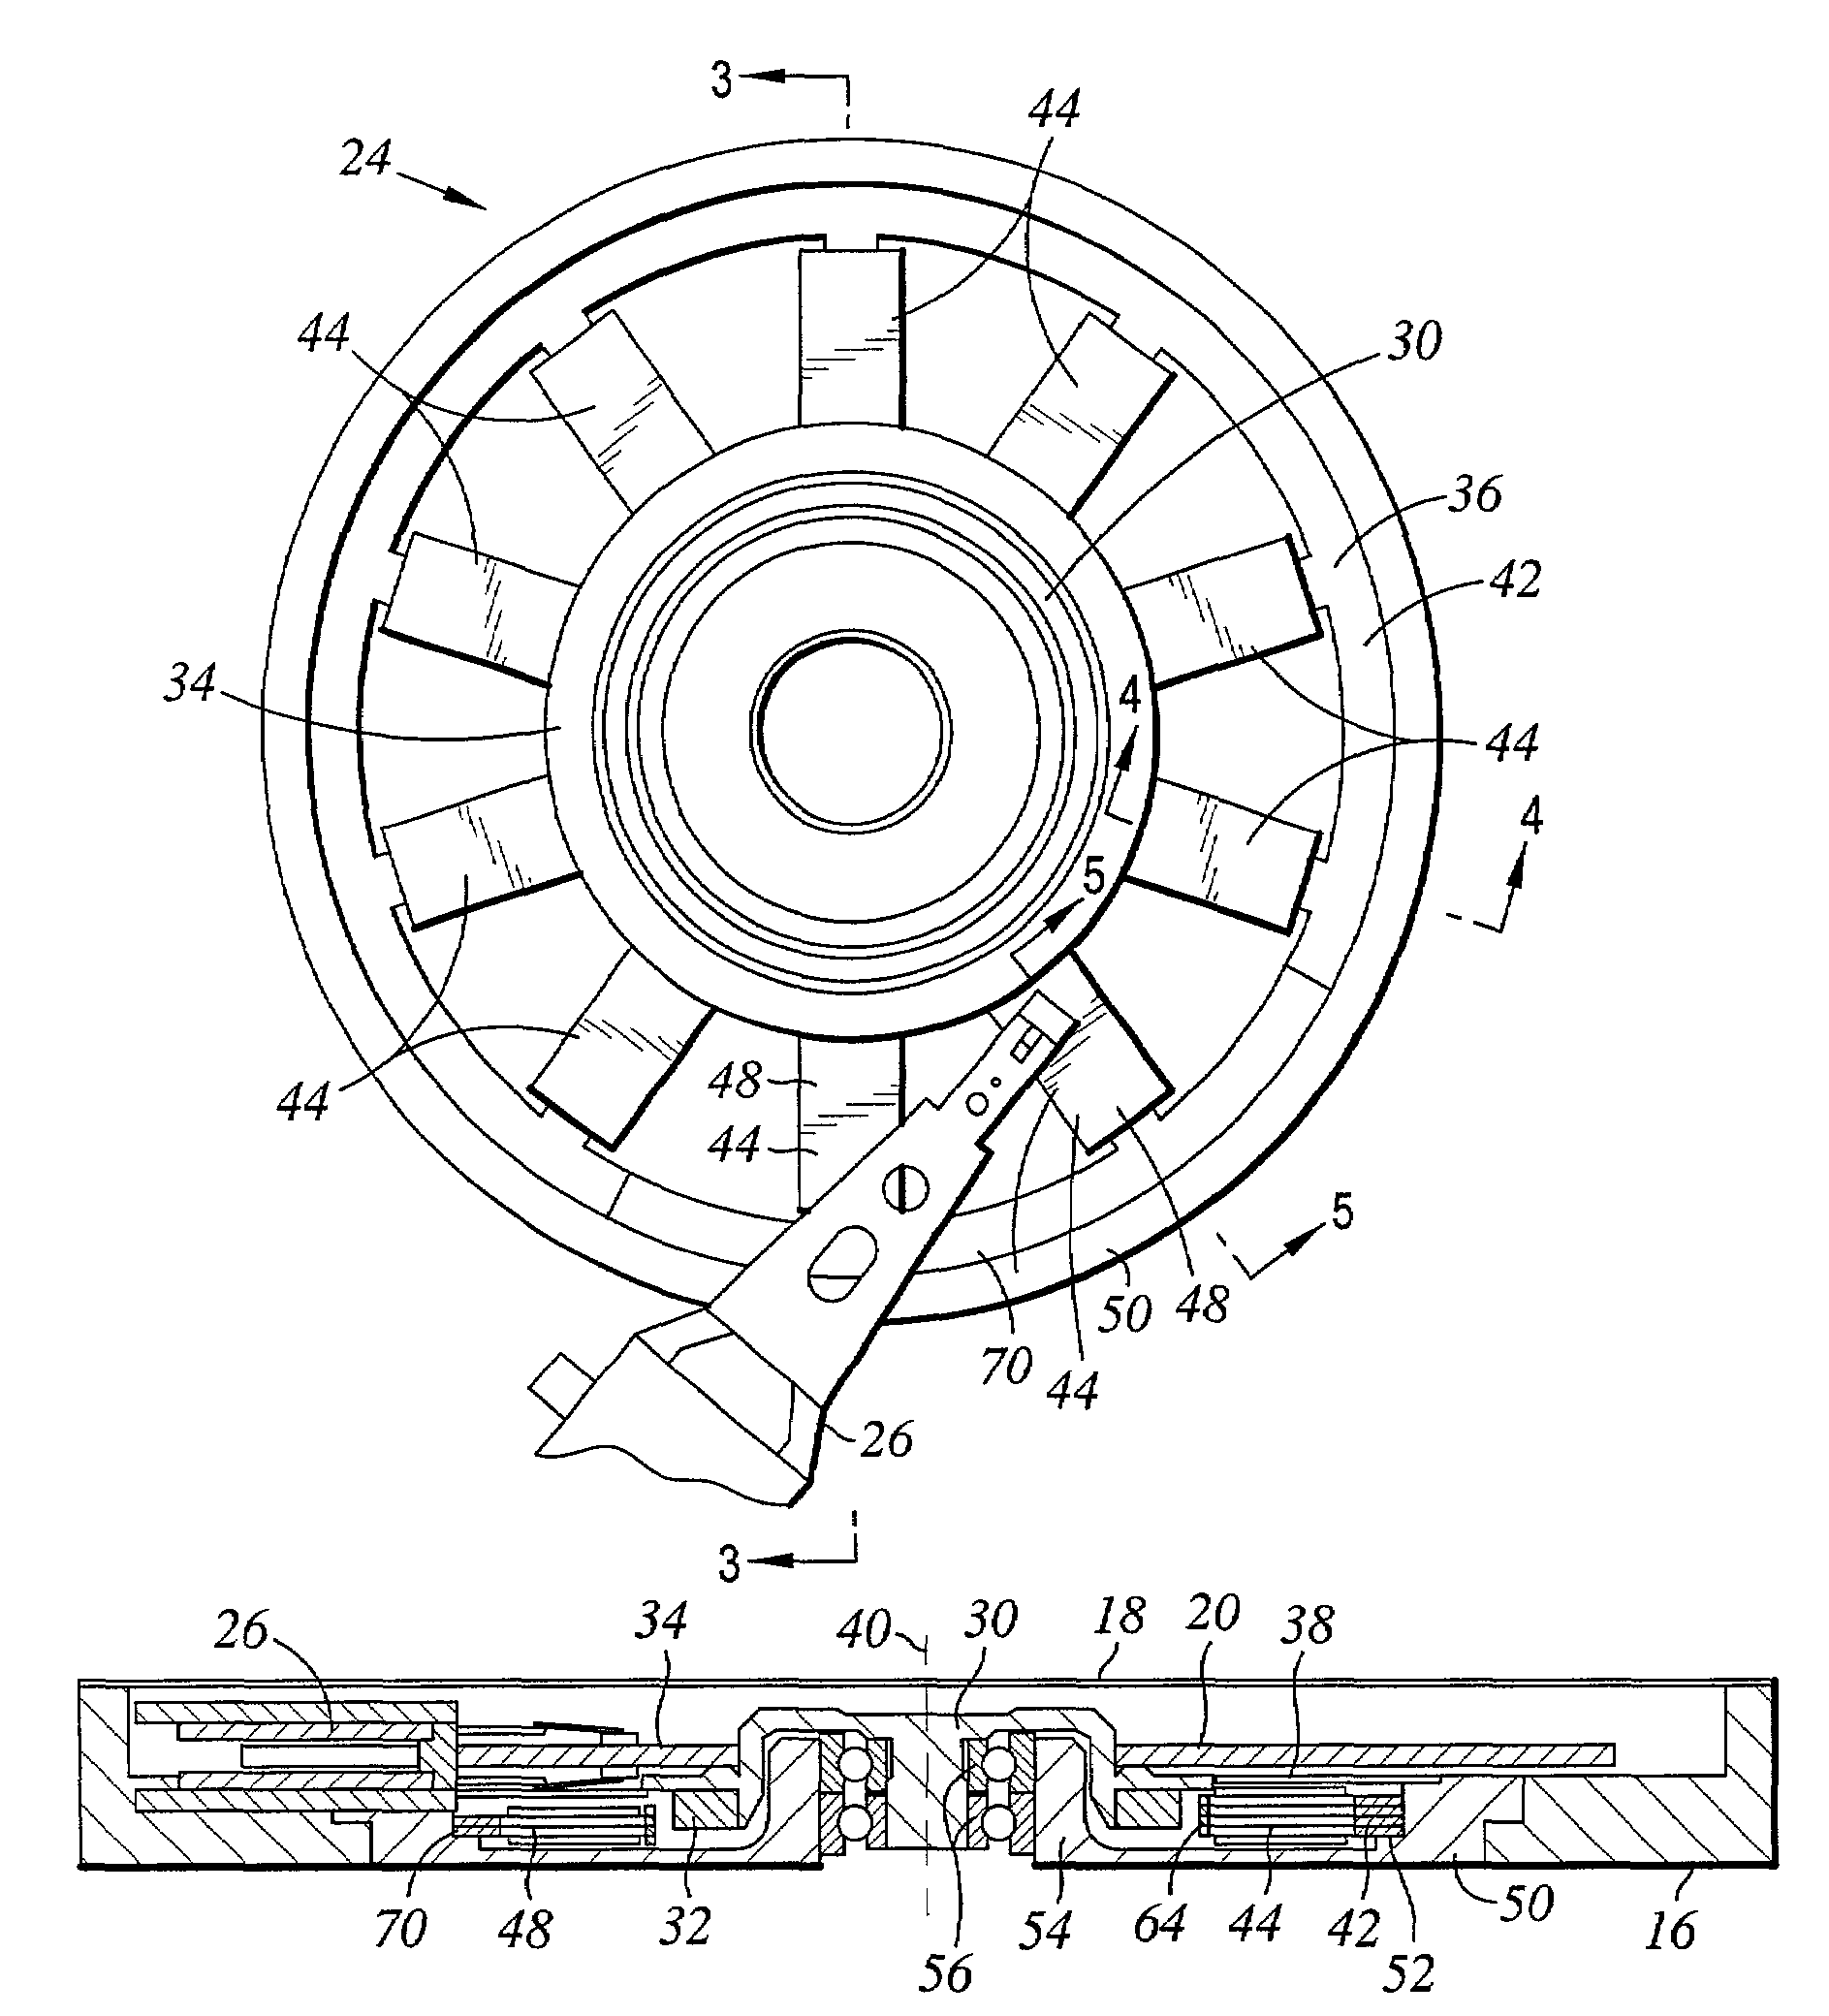 Spindle motor having spindle motor stator with laminate layers for increased head stack assembly access